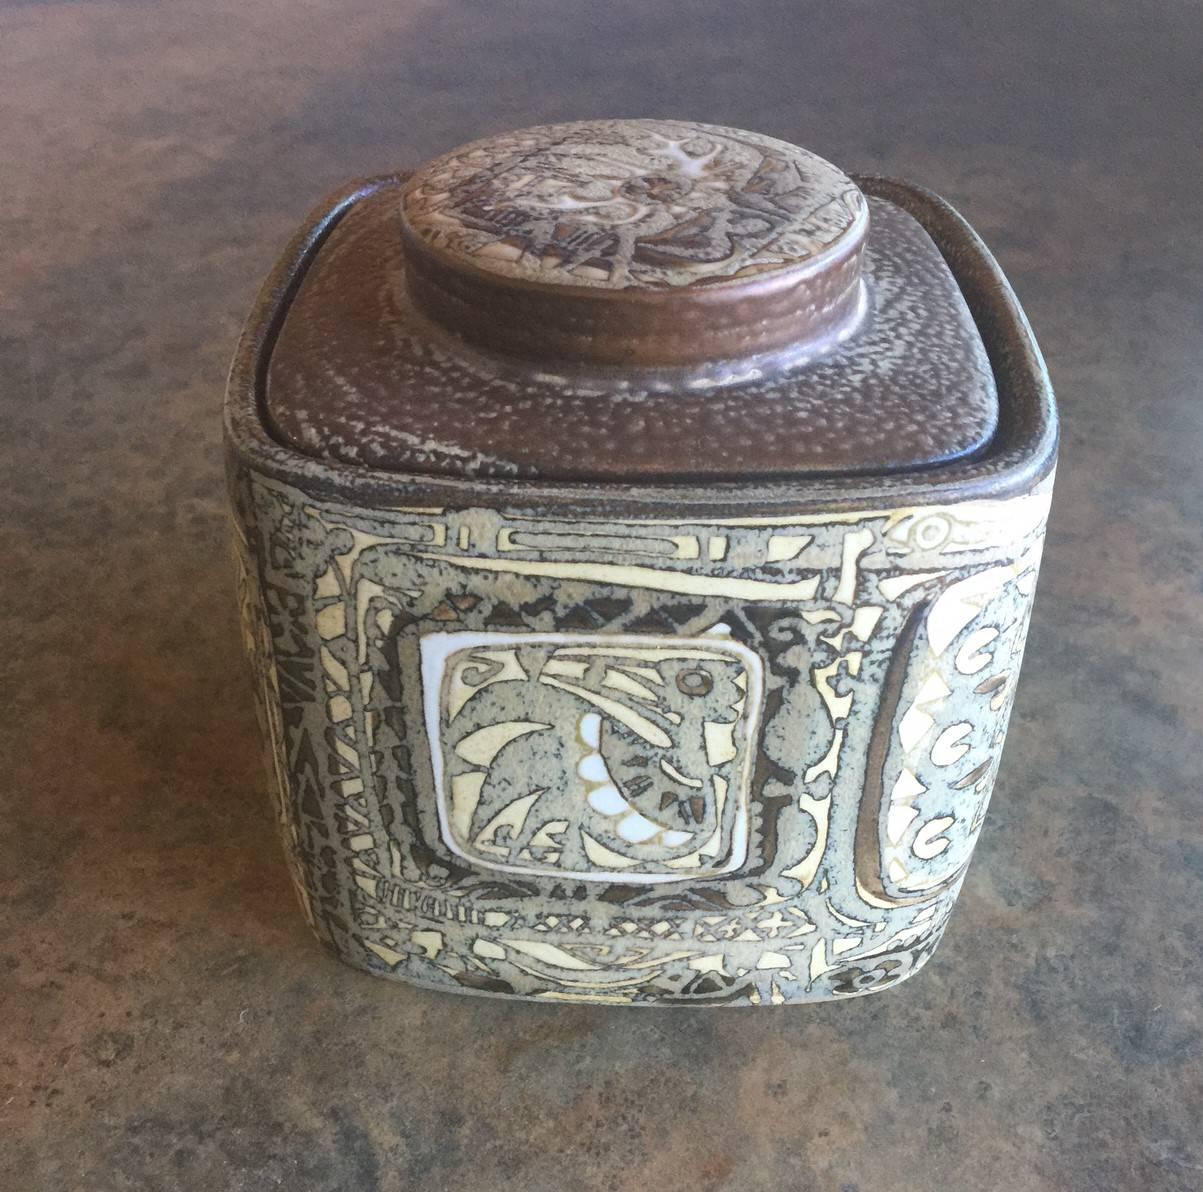 Rare Royal Copenhagen Fajance humidor / tobacco jar / lidded box from BACA series of the 1960s-1970s.

The design is by Nils Thorsson who was the artistic leader of Royal Copenhagen for decades.

This box has a fish and bird motive almost hidden